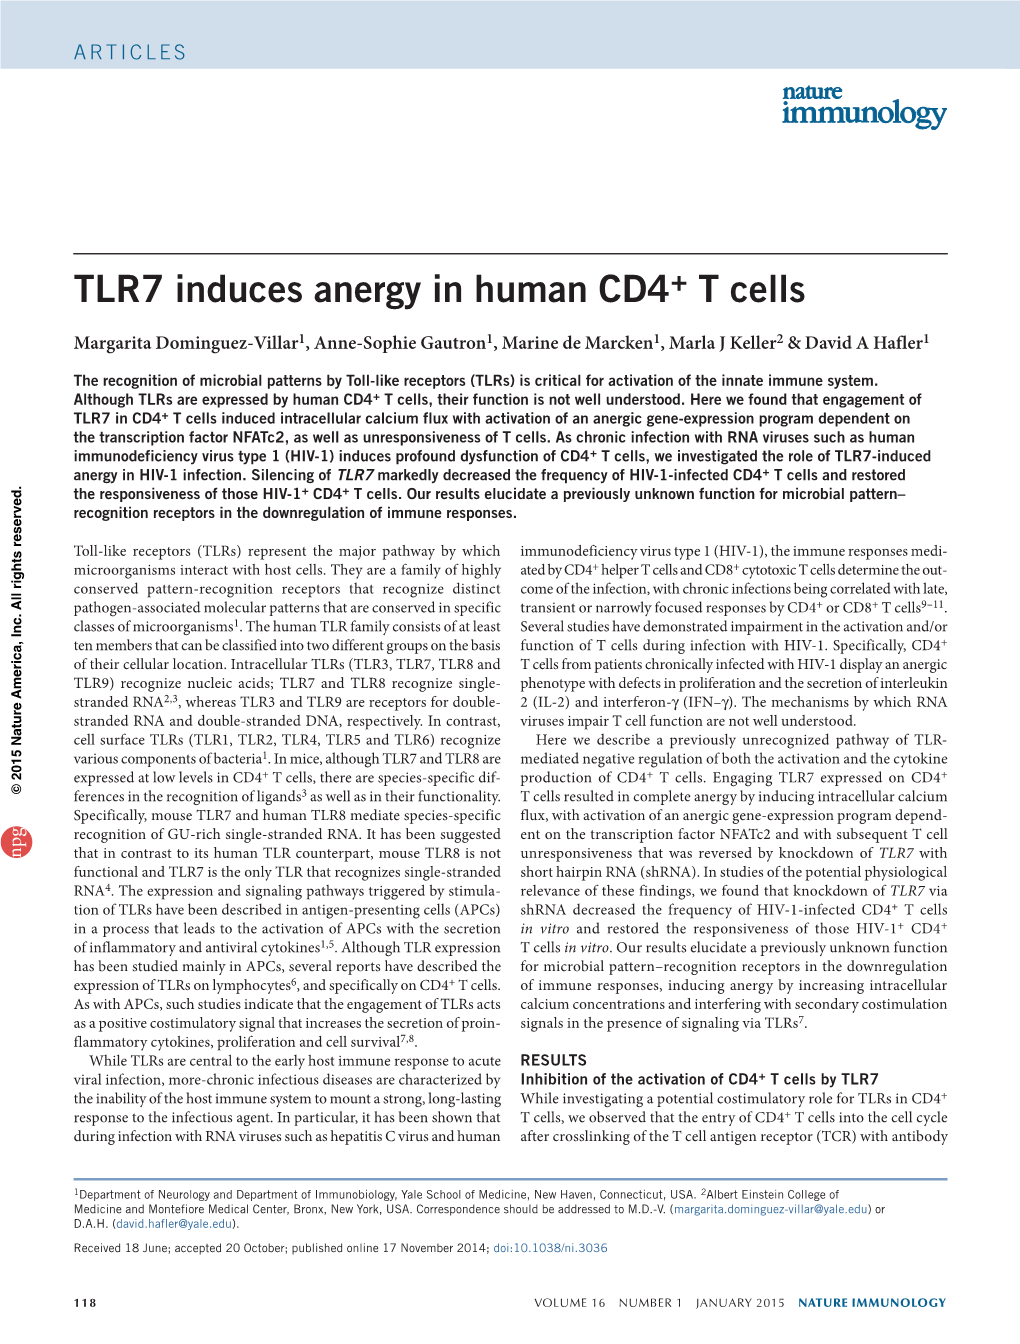 TLR7 Induces Anergy in Human CD4+ T Cells